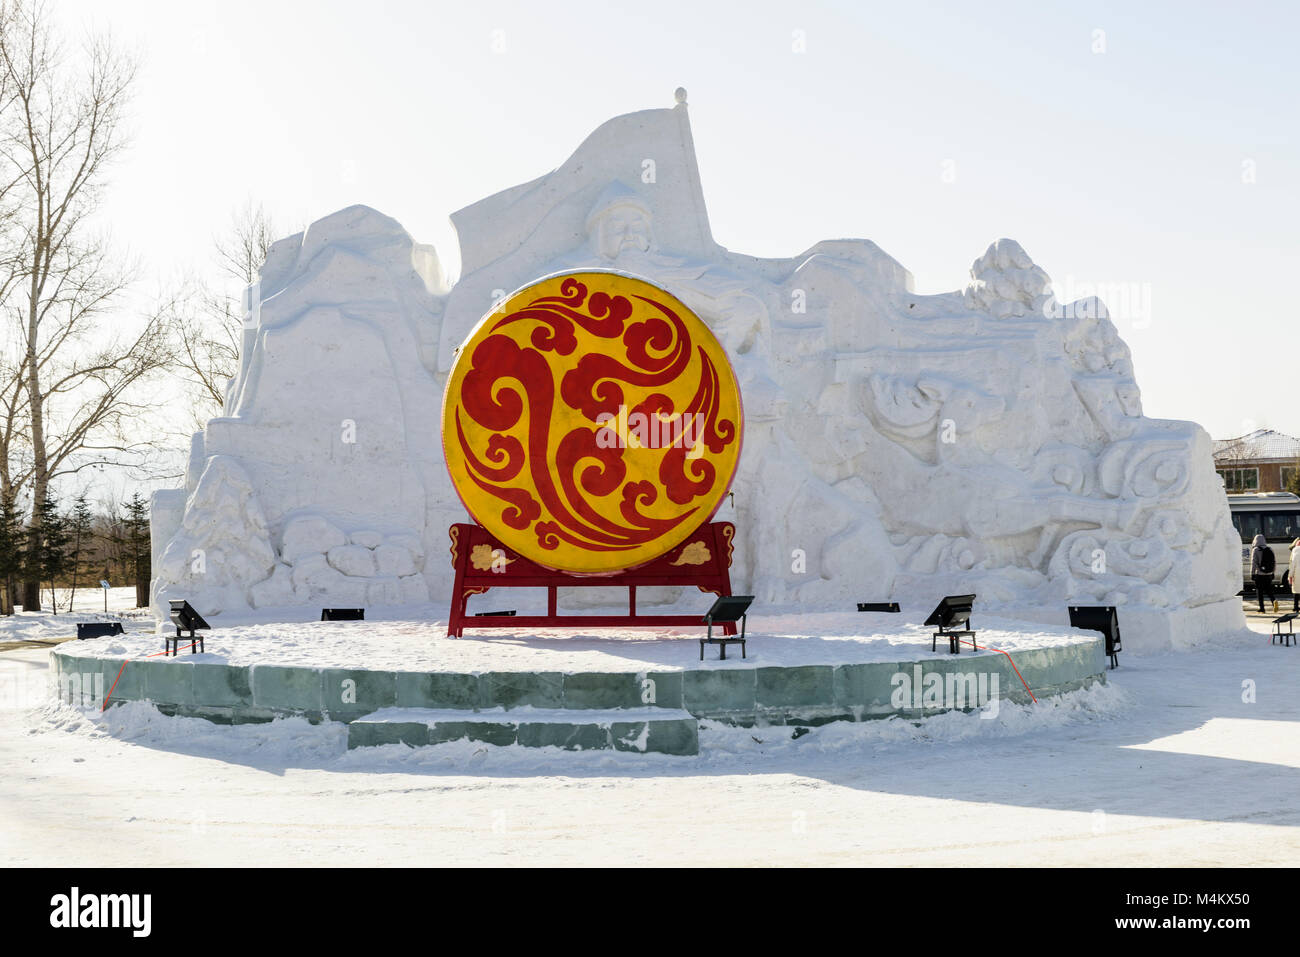 The entrance to the JIngpo Hu Geopark. This snow sculpture depics a war hero. Stock Photo